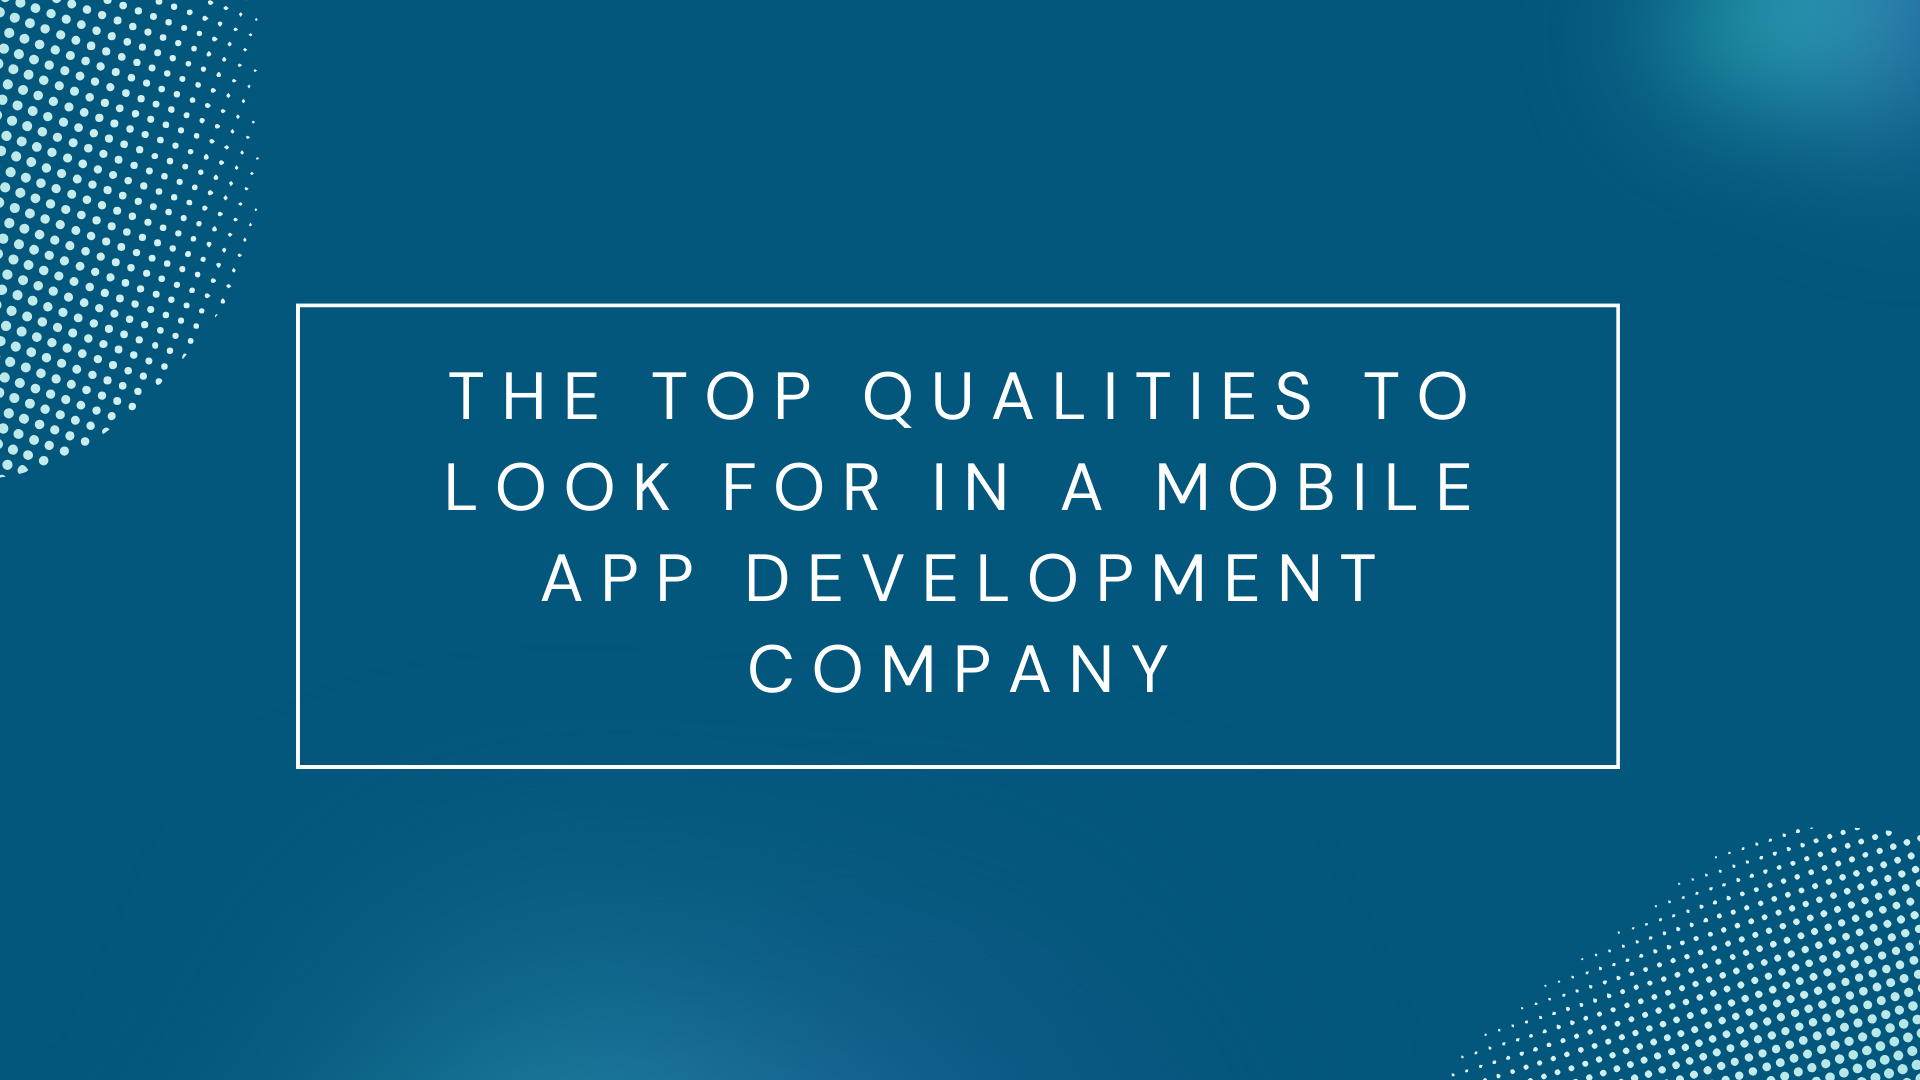 The Top Qualities to Look for in a Mobile App Development Company